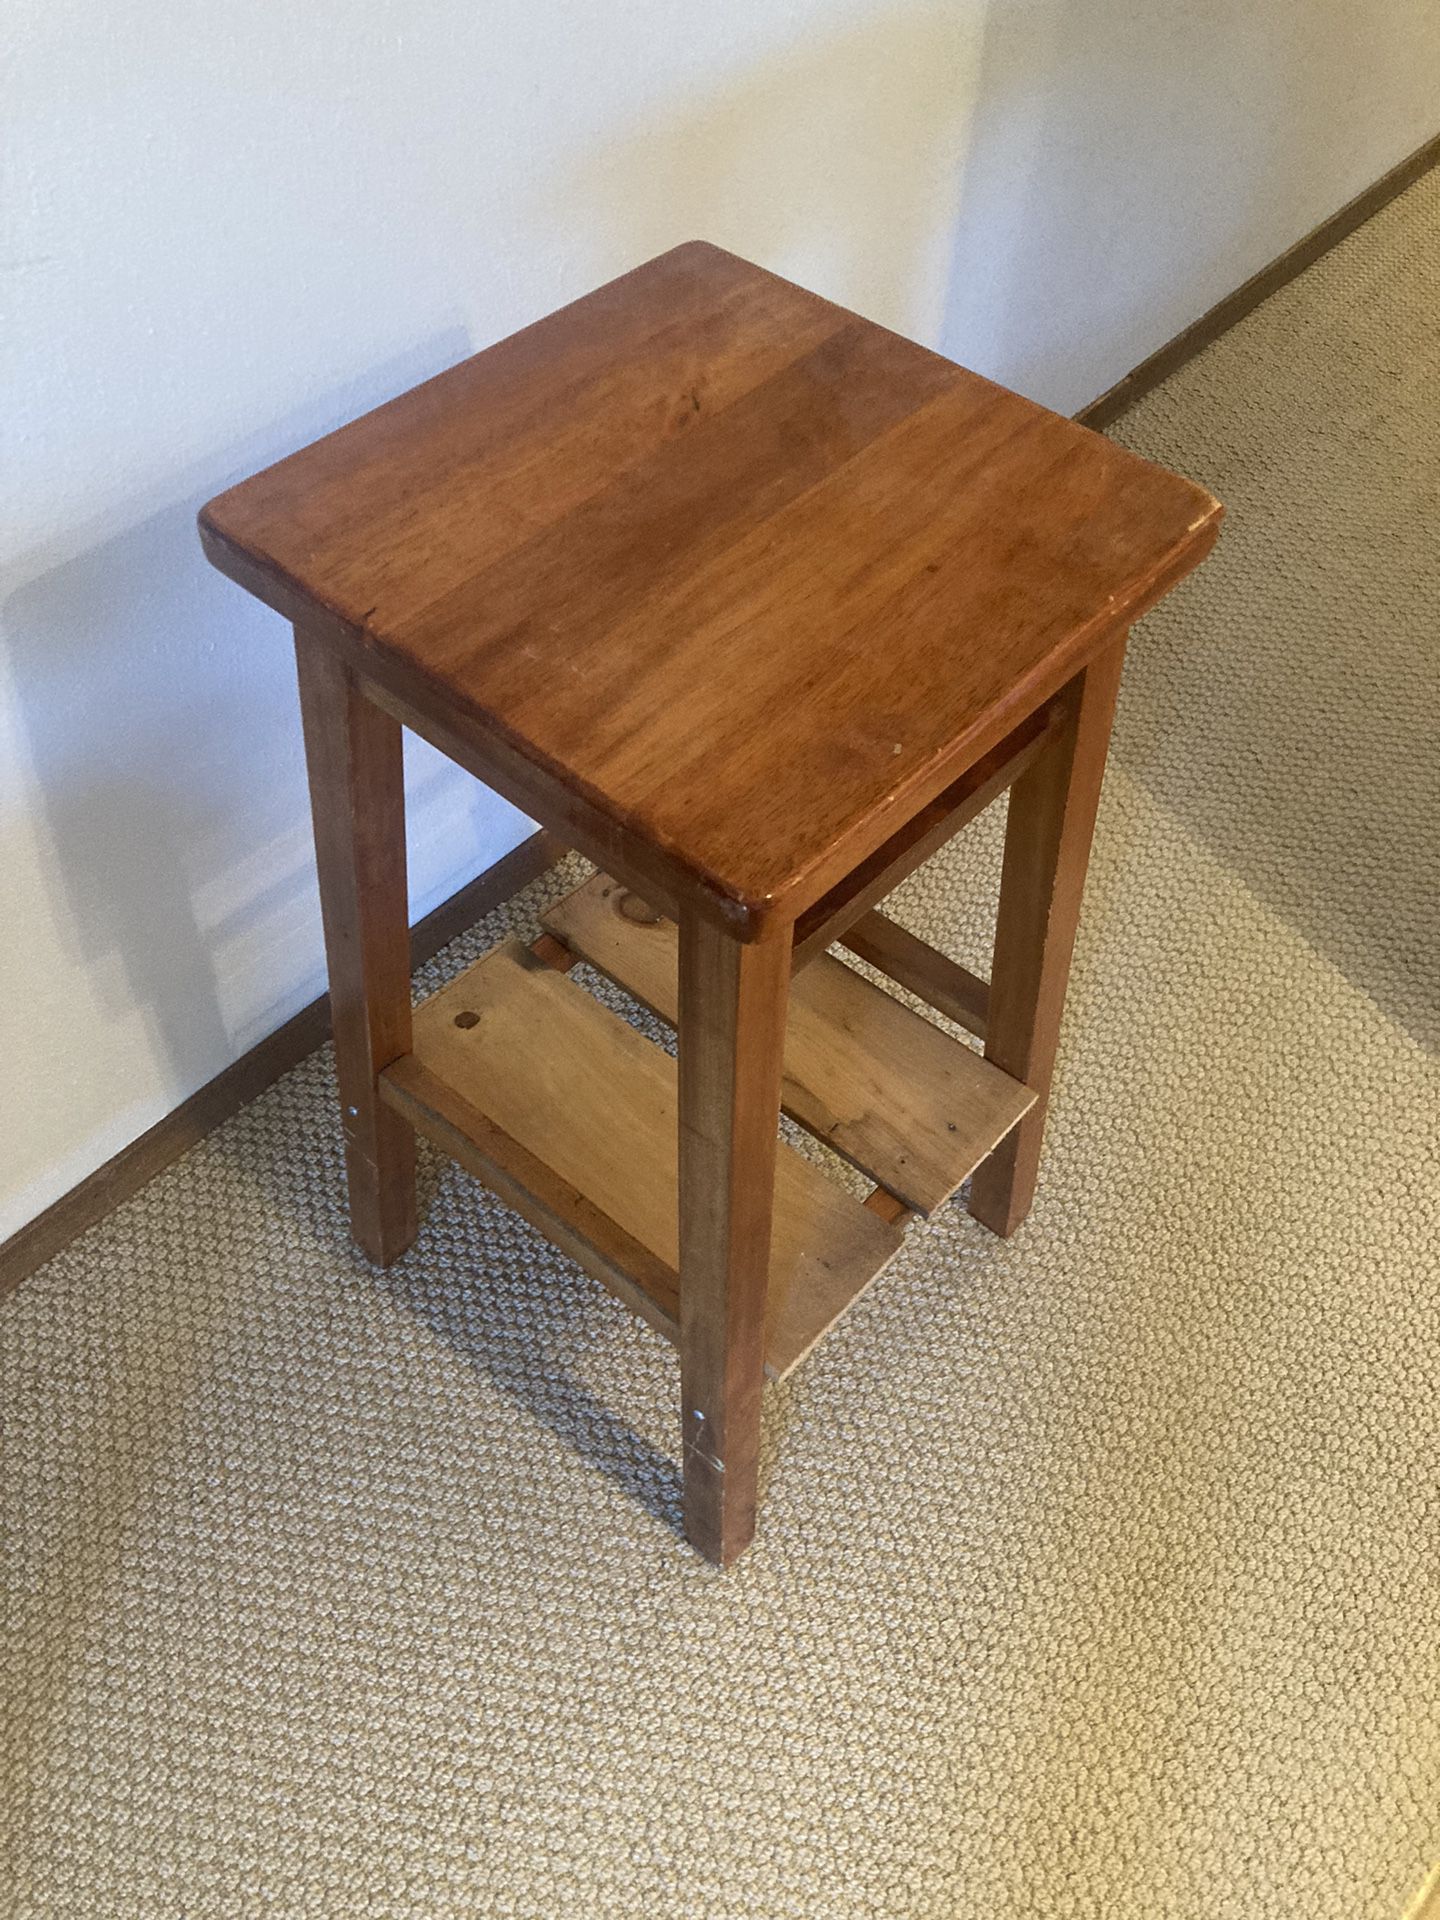 Wooden Stand/Chair $25